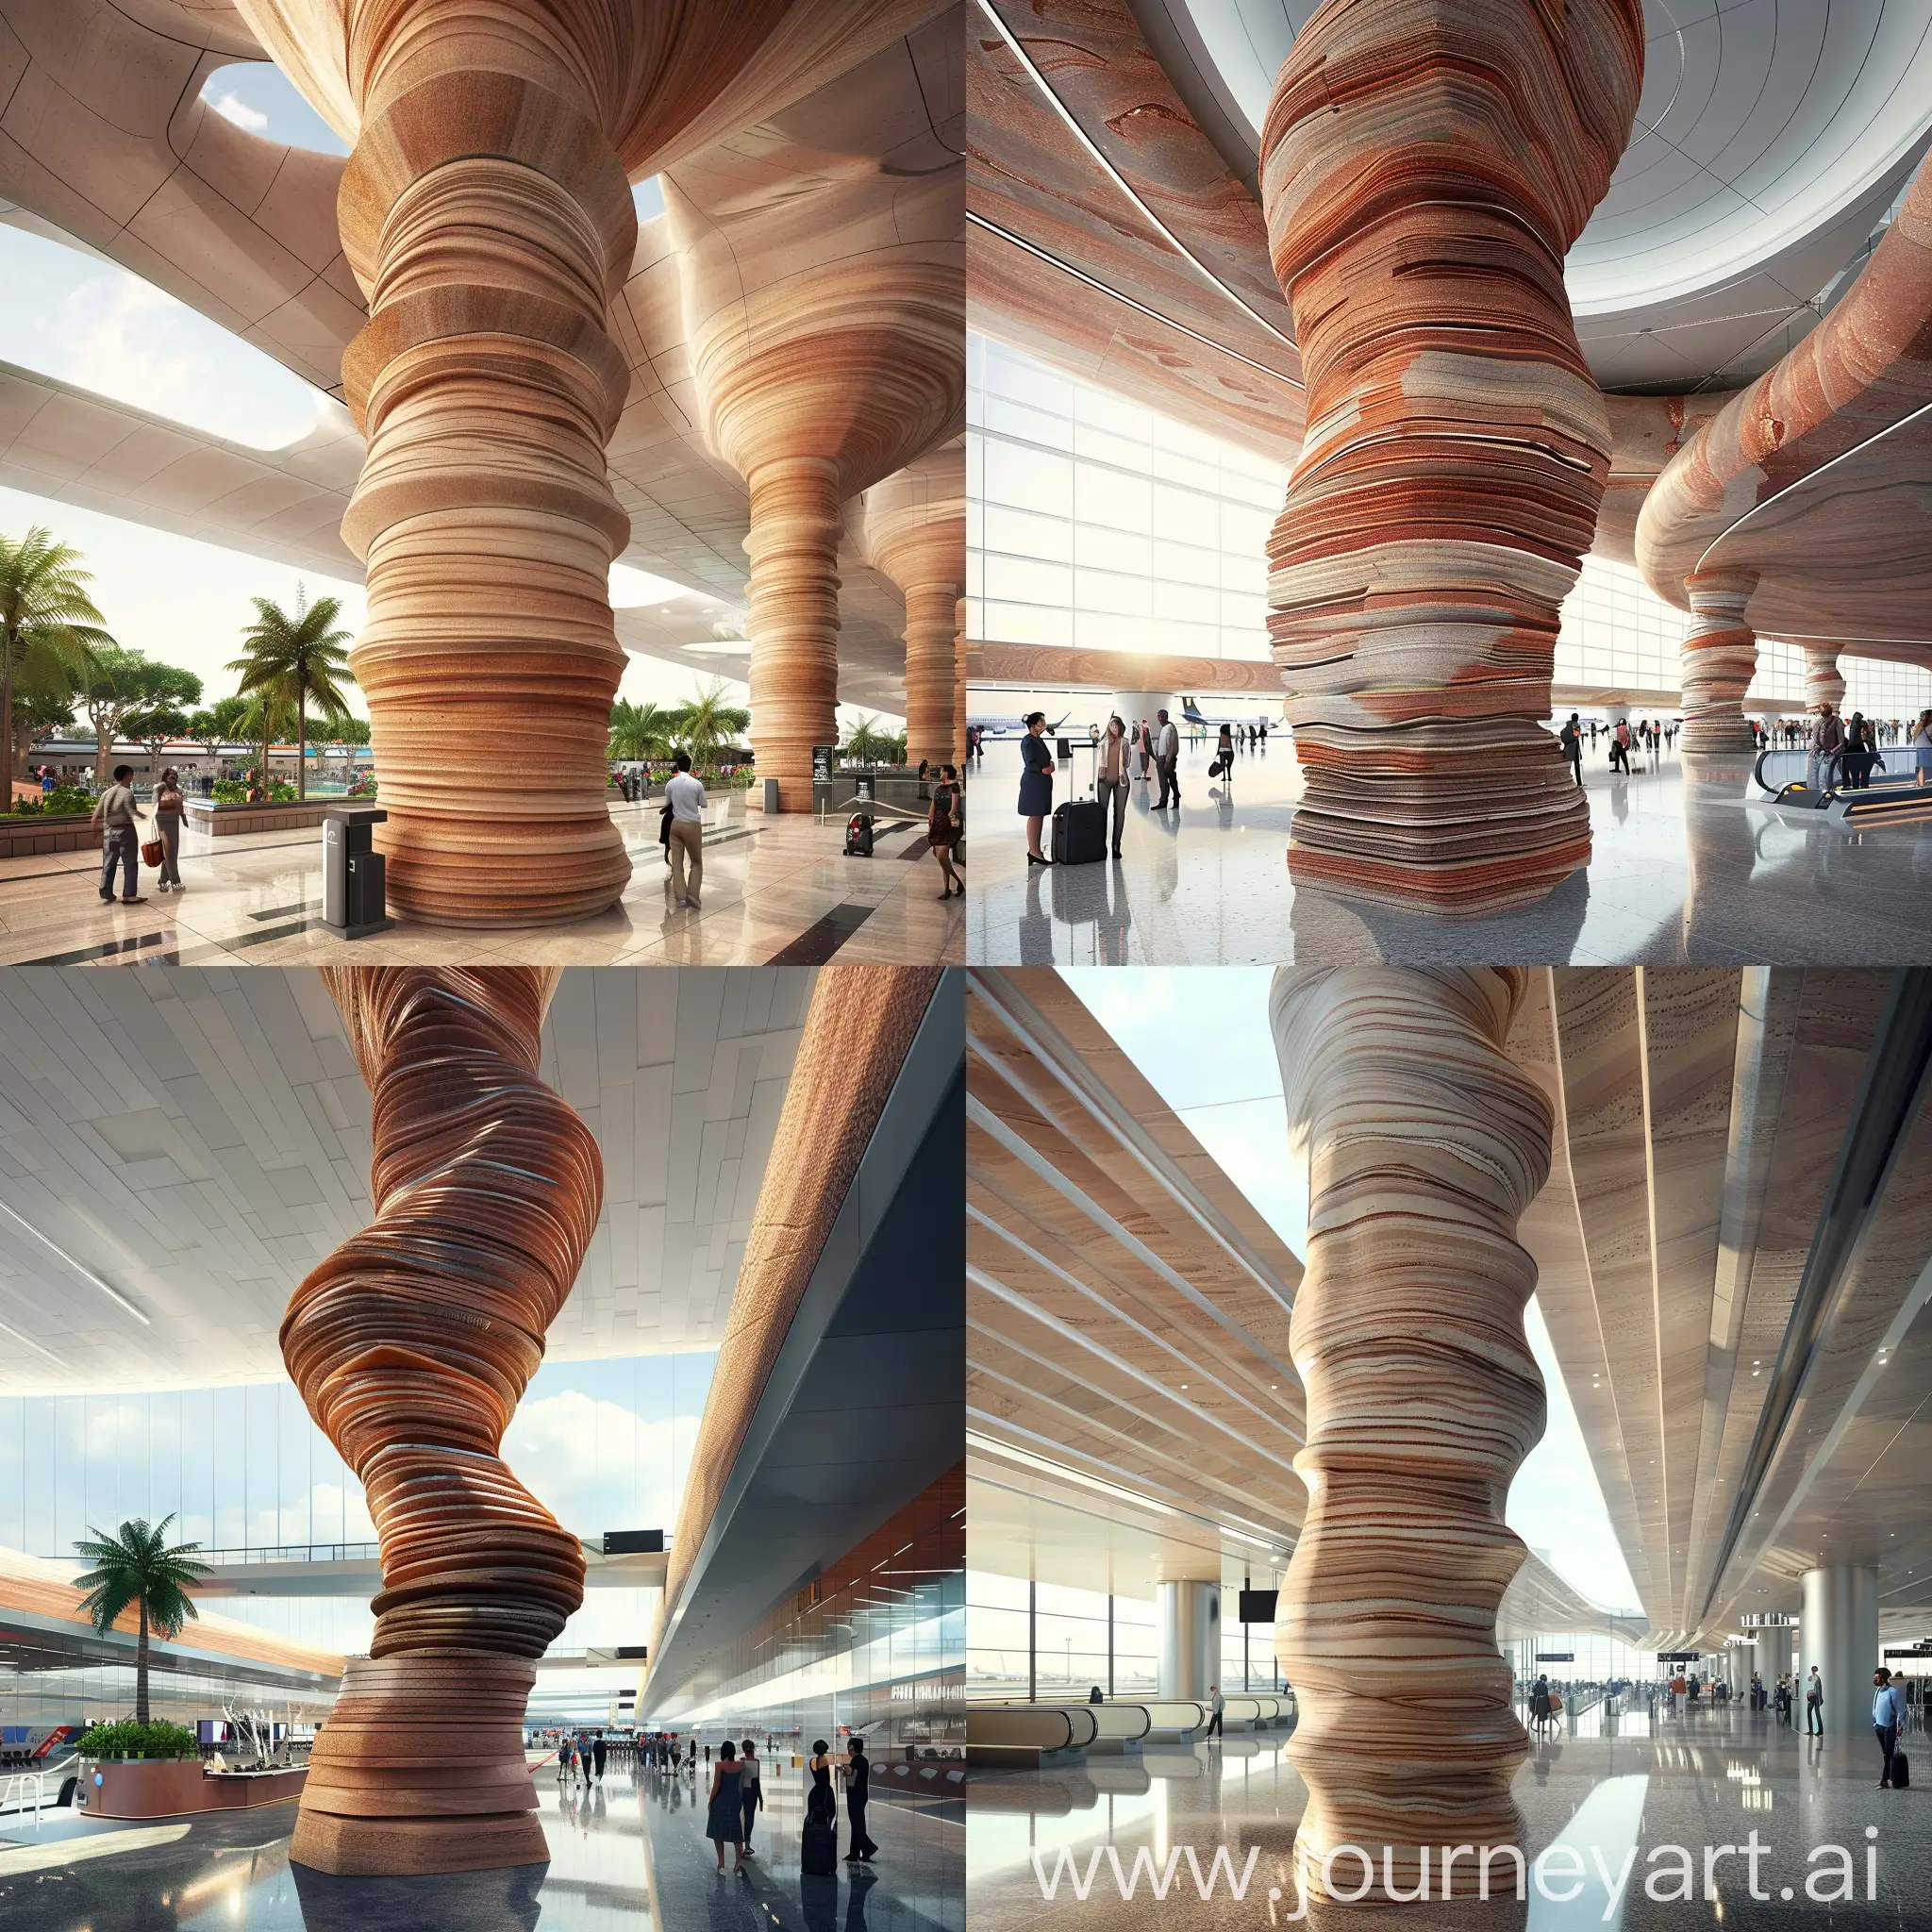 Imagine a futuristic airport column, crafted from layers of laterite stone, standing tall and proud in the midst of a bustling terminal. Its sleek and organic design seamlessly blends modern architecture with natural elements, creating a truly unique and visually stunning structure."